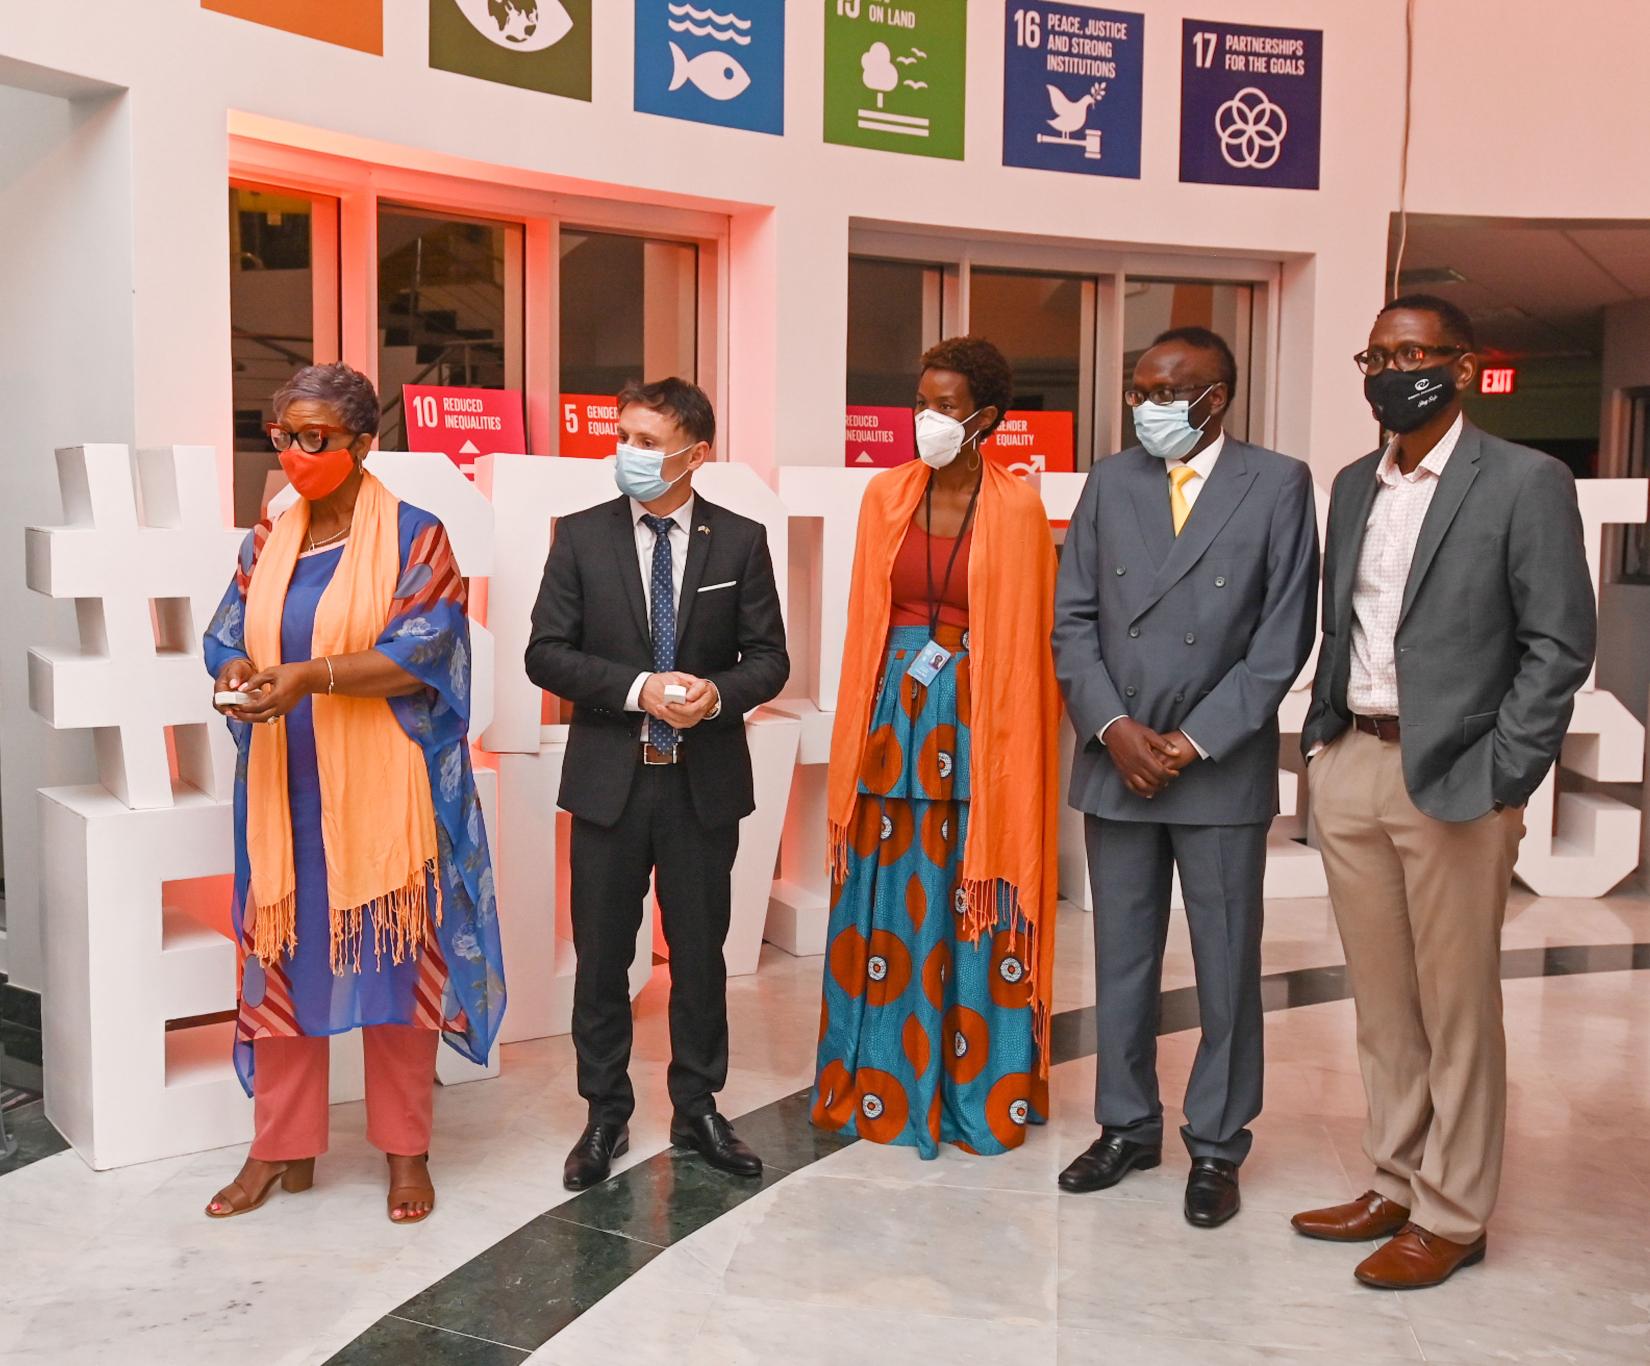 Government and UN officials participating in the 16 Days Lighting Ceremony 